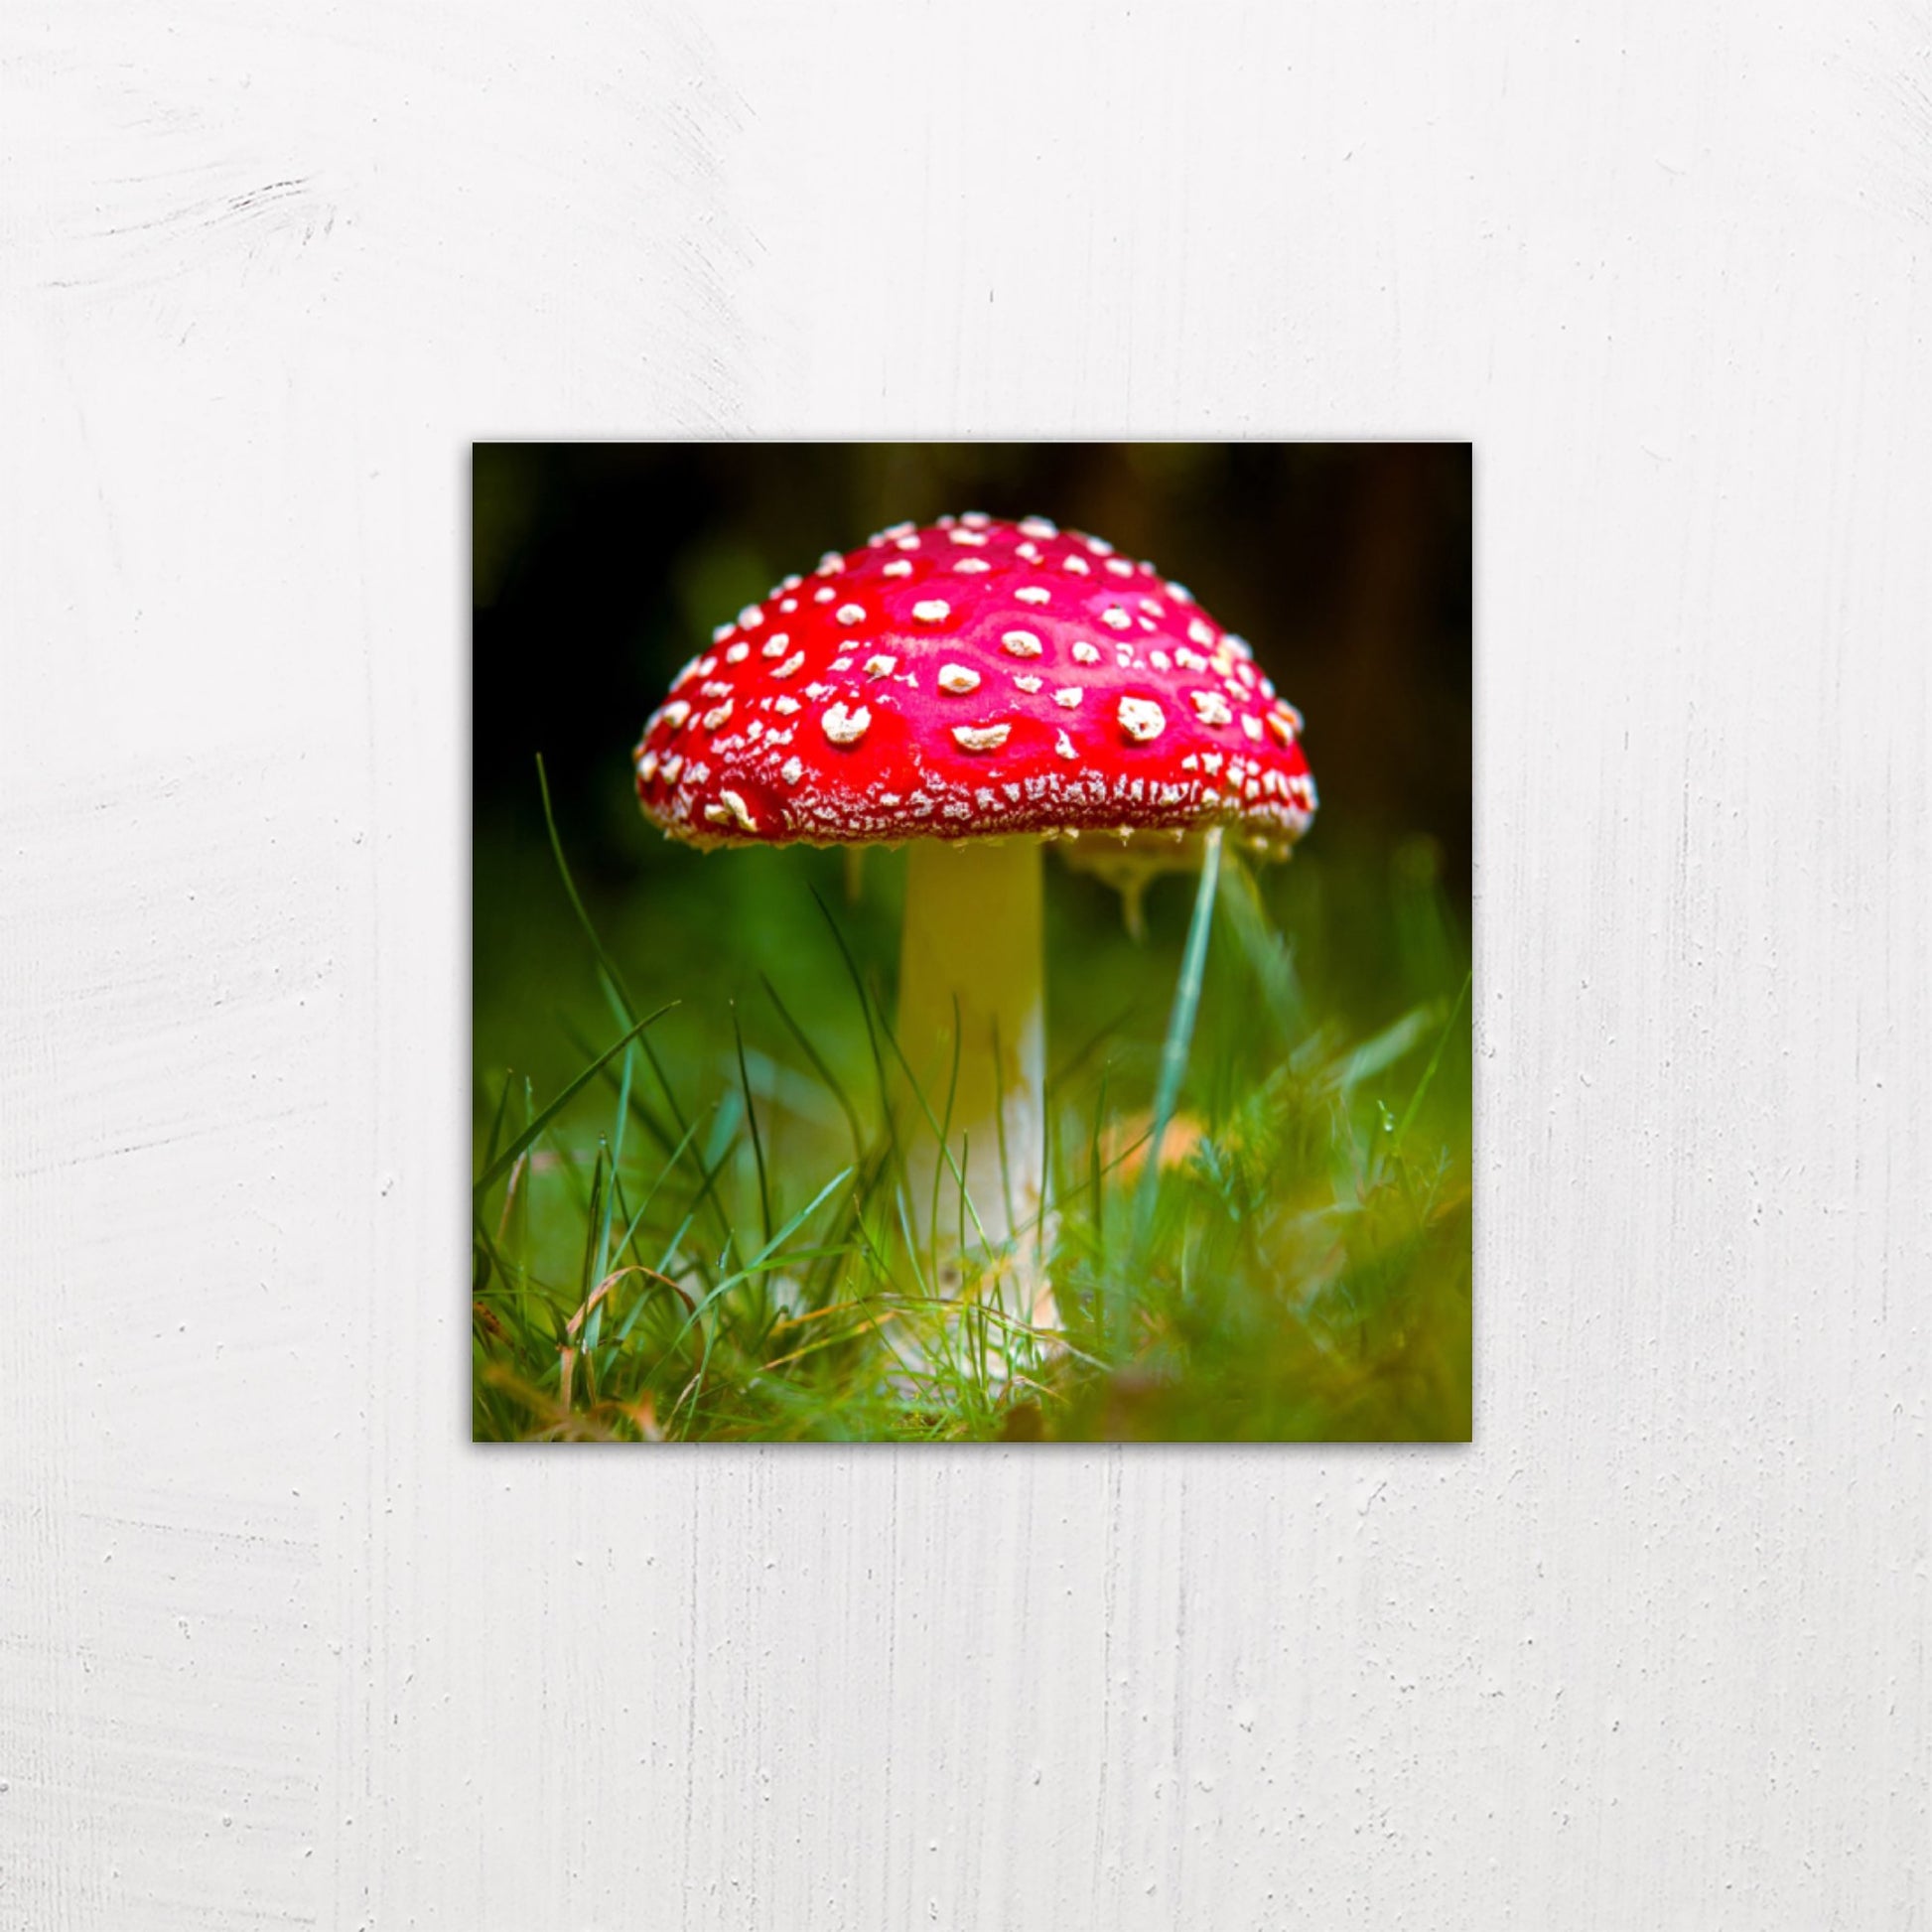 A medium size metal art poster display plate with printed design of a Fly Agaric (Amanita muscaria) Fungi